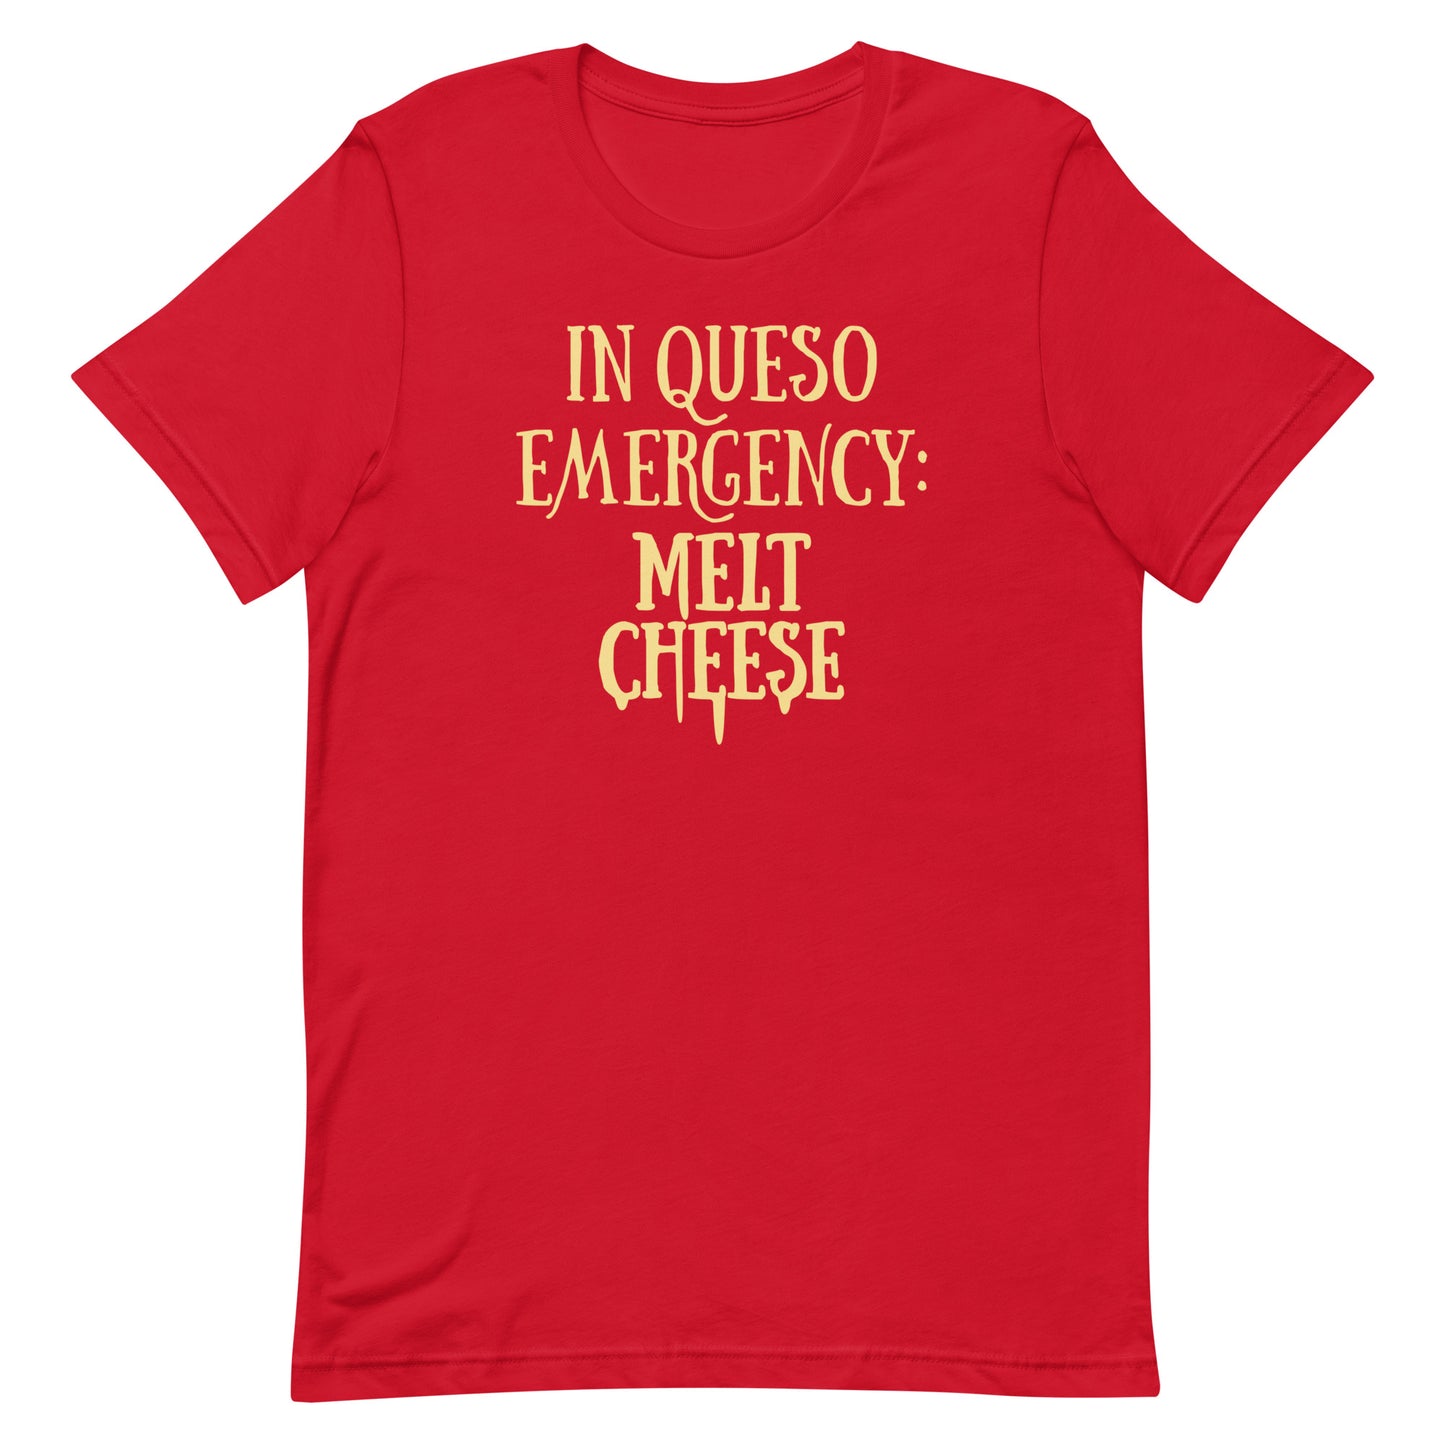 In Queso Emergency: Melt Cheese Men's Signature Tee